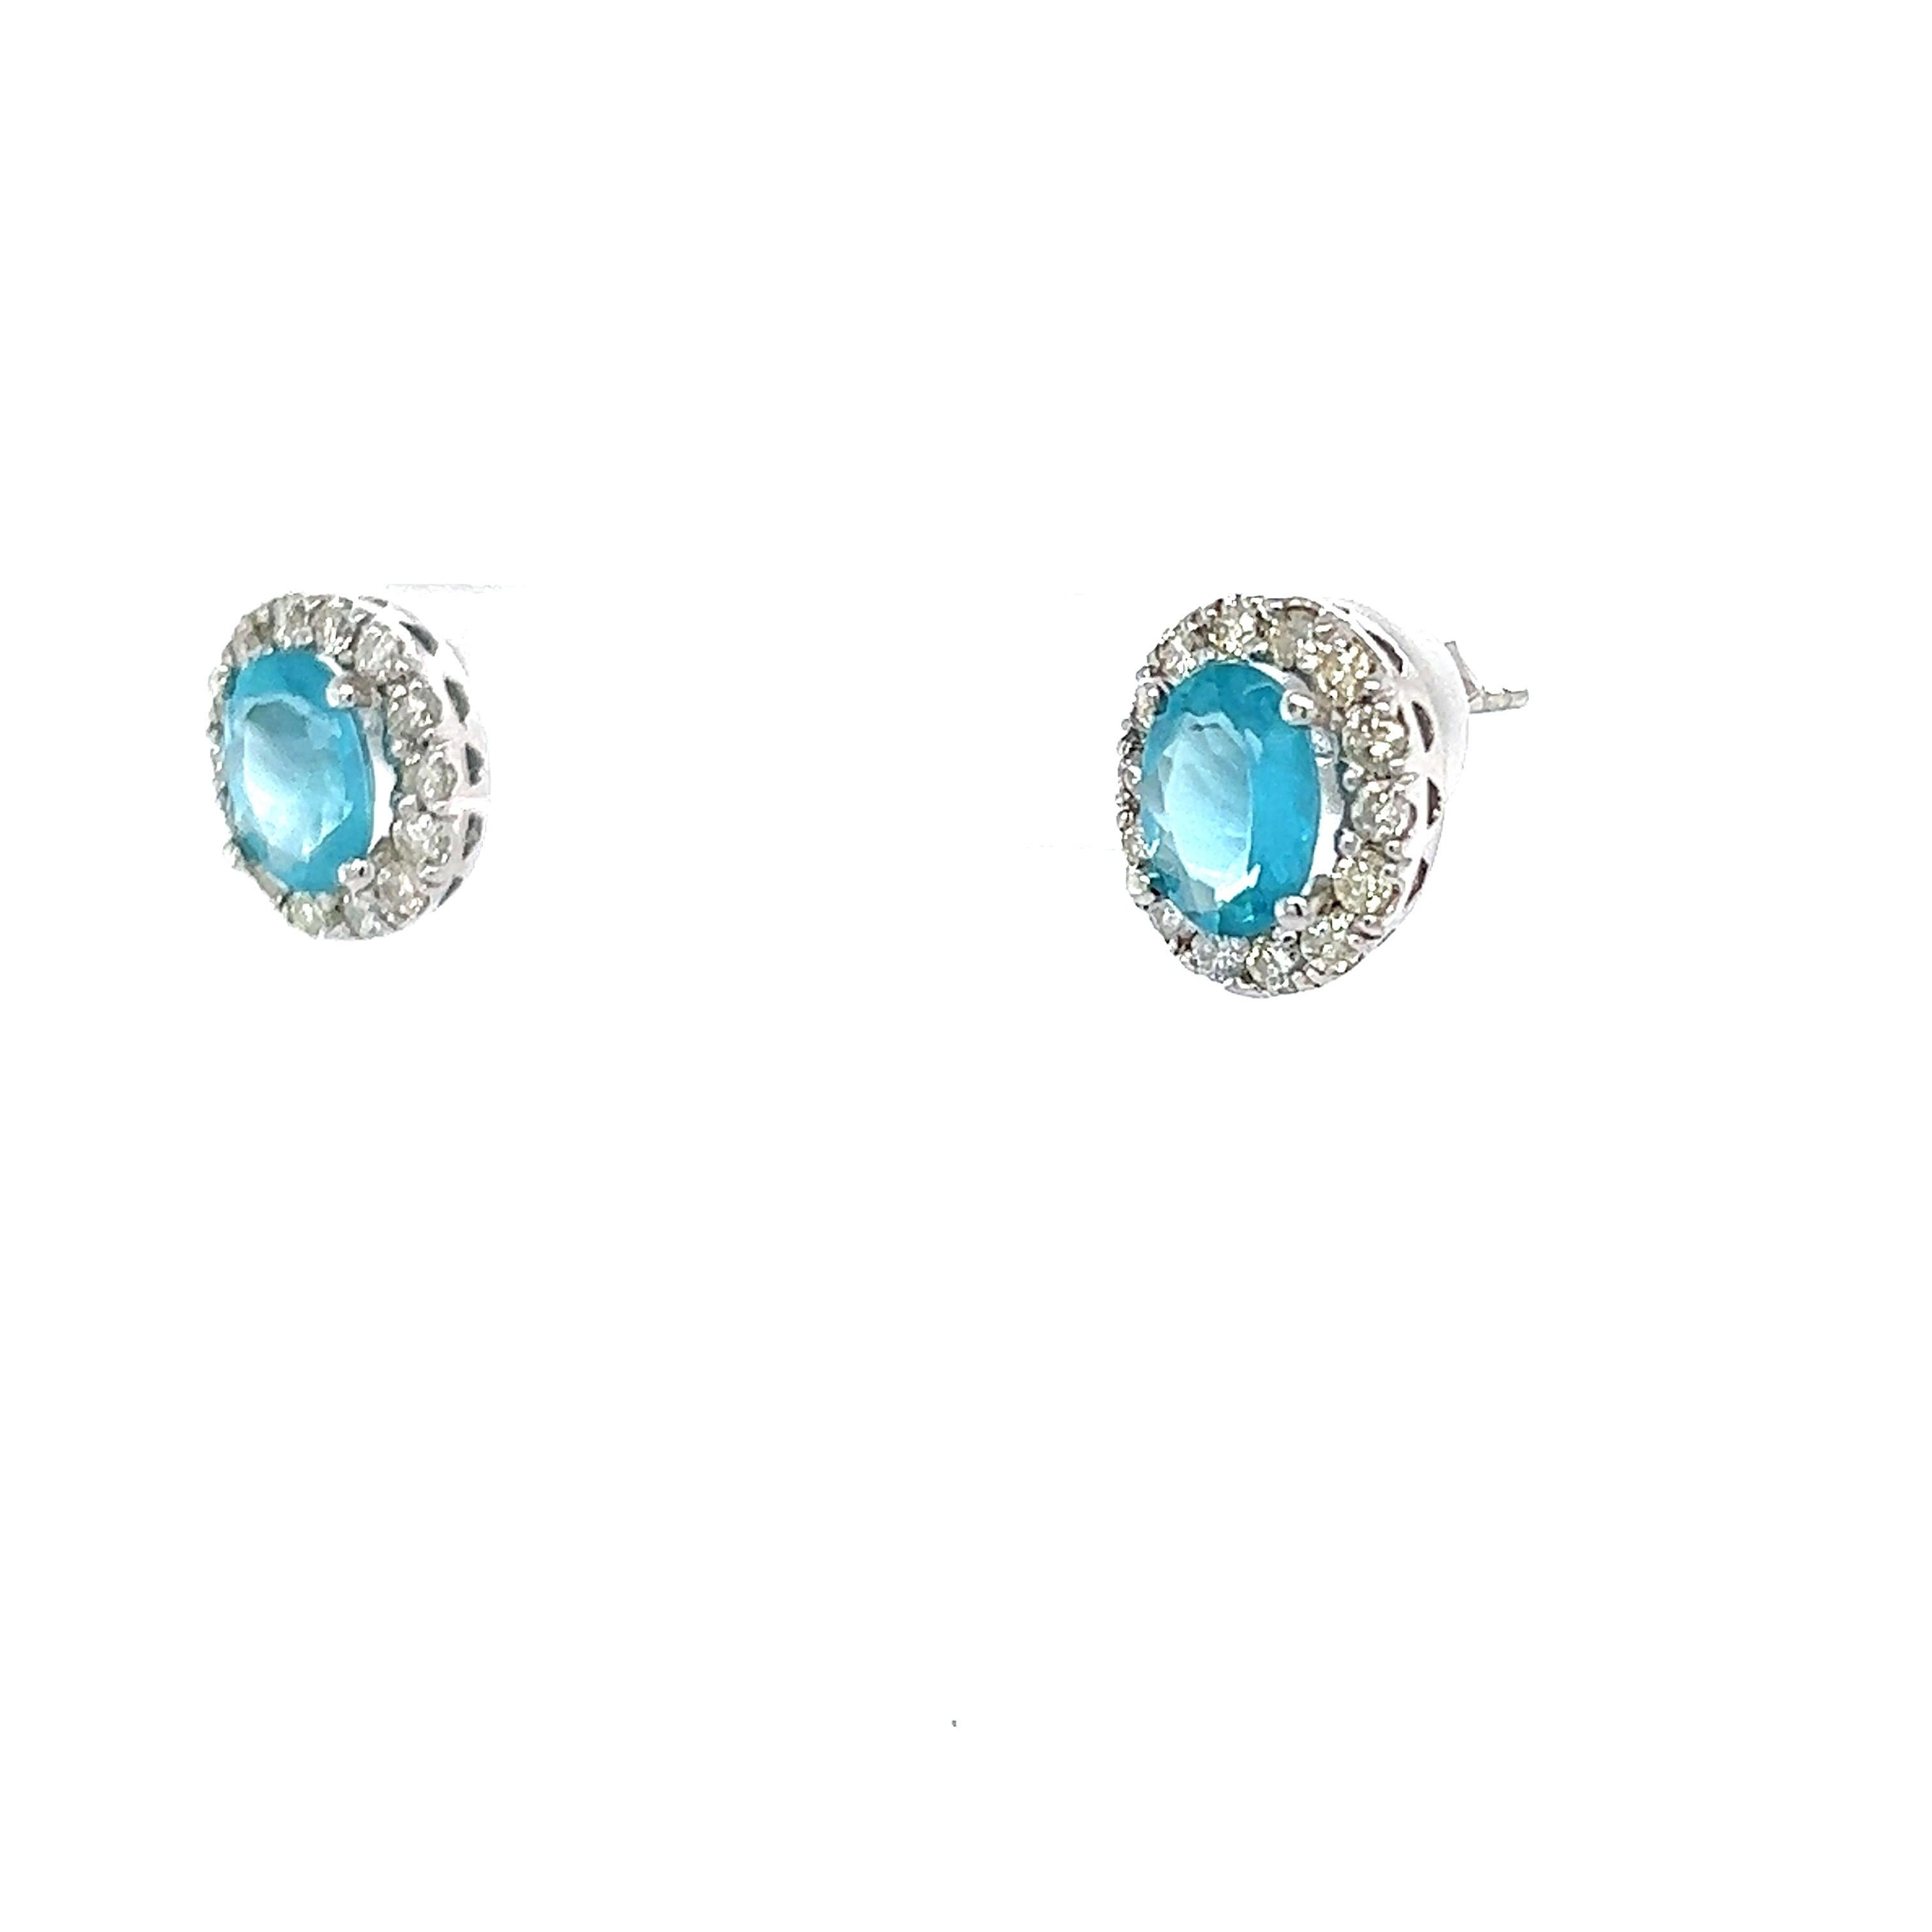 Apatite and Diamond Earrings
2 Natural Oval Cut Apatites that weigh 2.12 Carats and measures at 8 mm x 6 mm. The earrings measure at 12 mm x 10 mm. 

There are 28 Round Cut Natural Diamonds that weigh 0.73 carats and have a clarity/color of